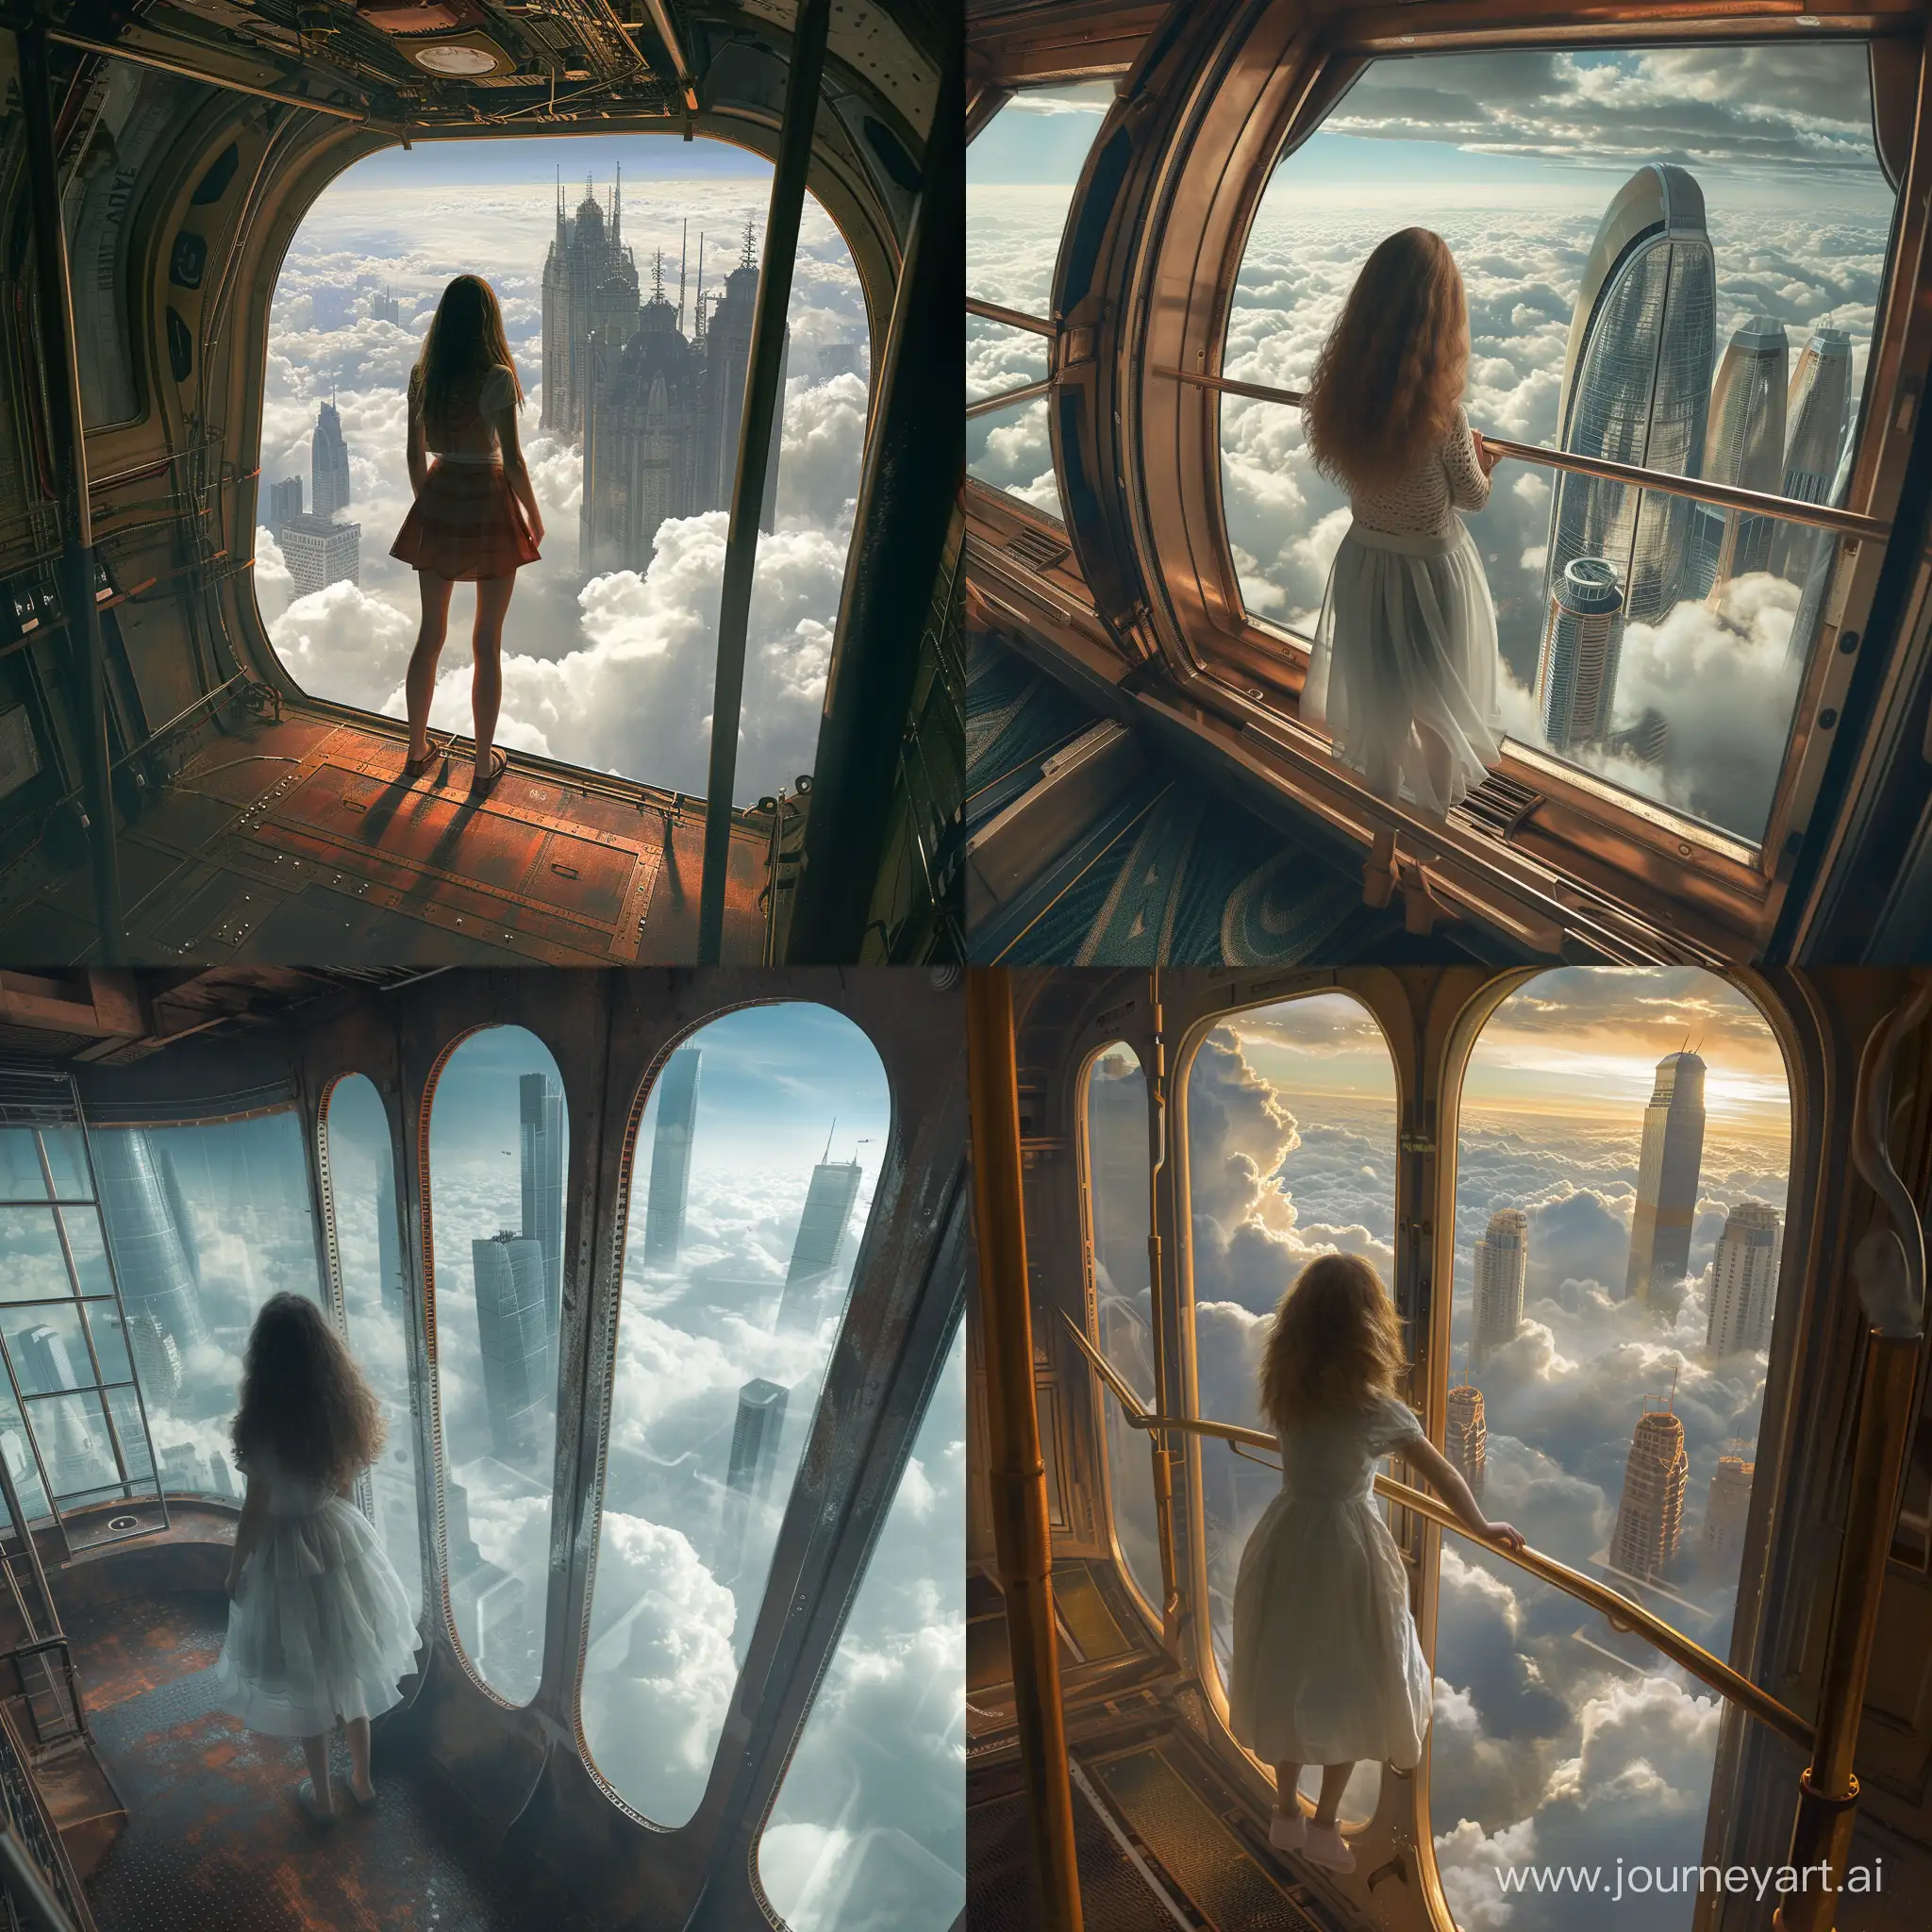 the girl rides standing in an old monorail that rises above the clouds and looks out the window, where the tops of skyscrapers made in the style of Soviet panel houses are visible